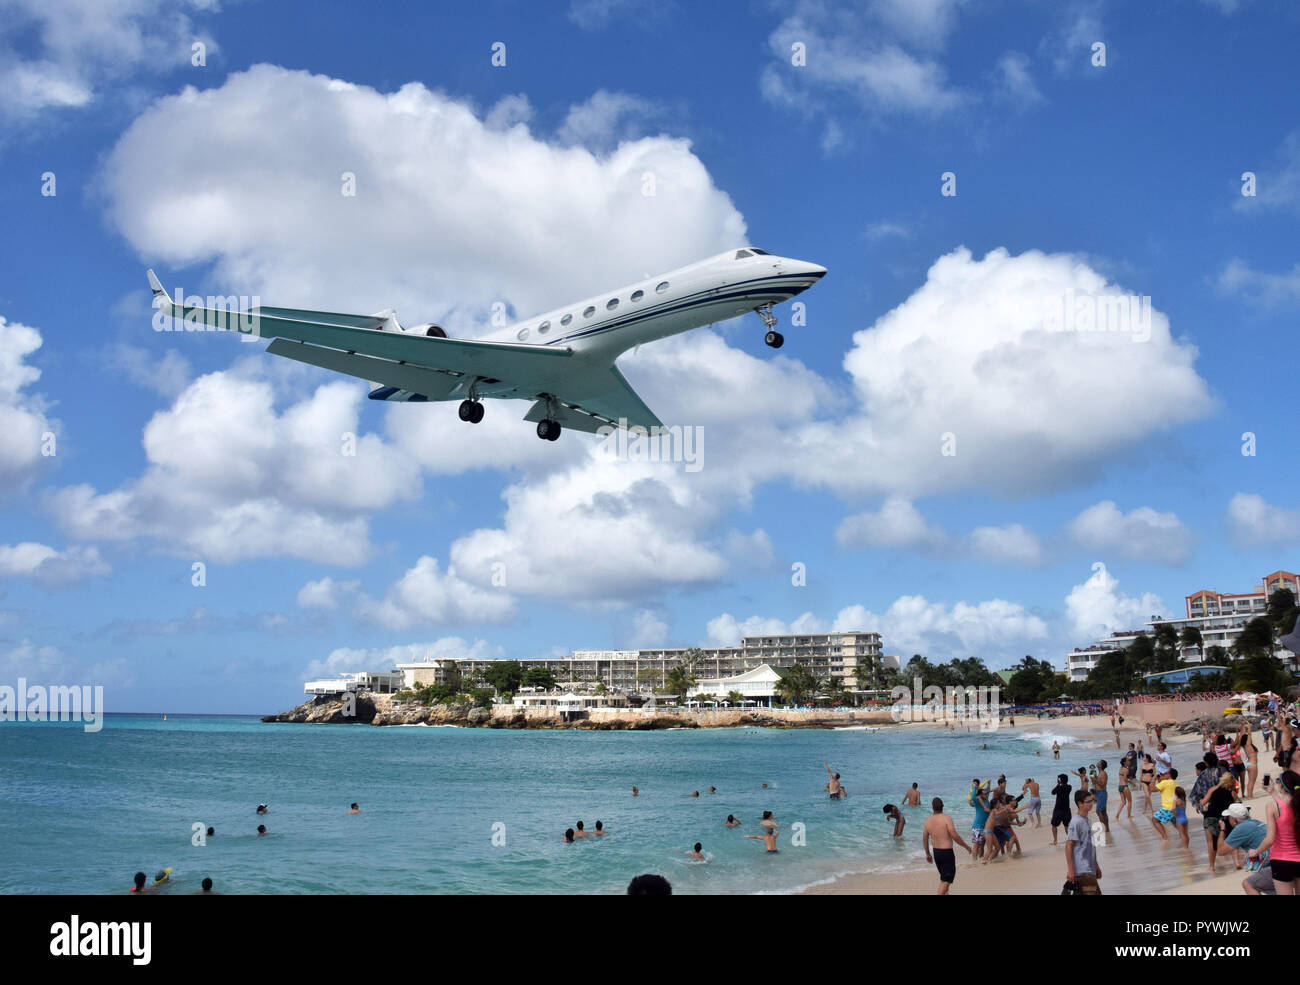 MAHO BEACH - ST MAARTEN: Jet lands low over the beach in St Maarten in the Caribbean on December 24, 2015 as tourists enjoy the landmark location Stock Photo